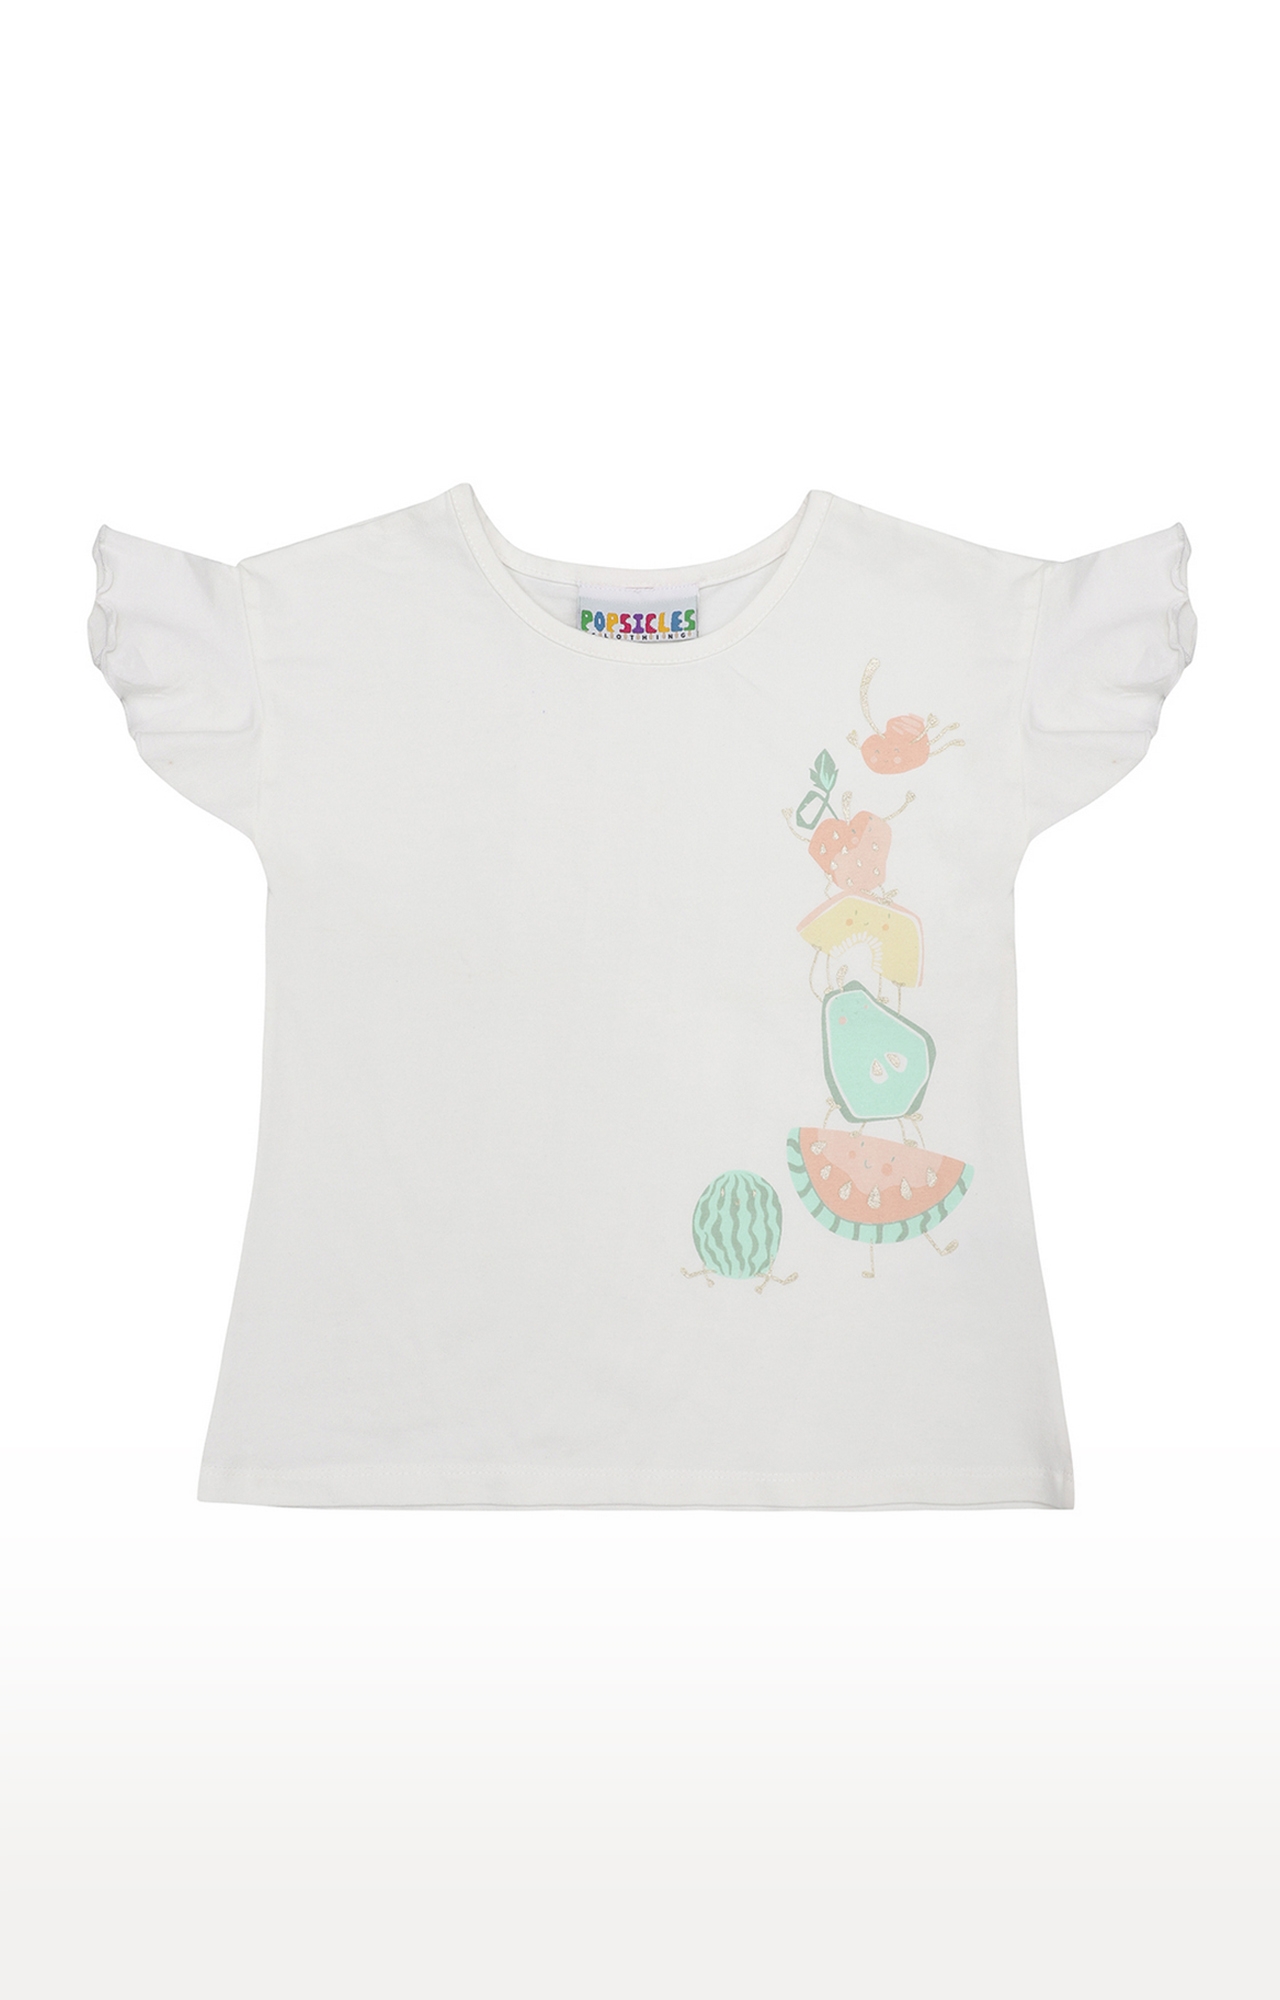 Popsicles Clothing | Popsicles Soft Cotton Comfort fit Round Neck Cap Sleeves Girls Top - Off White (0-6M)